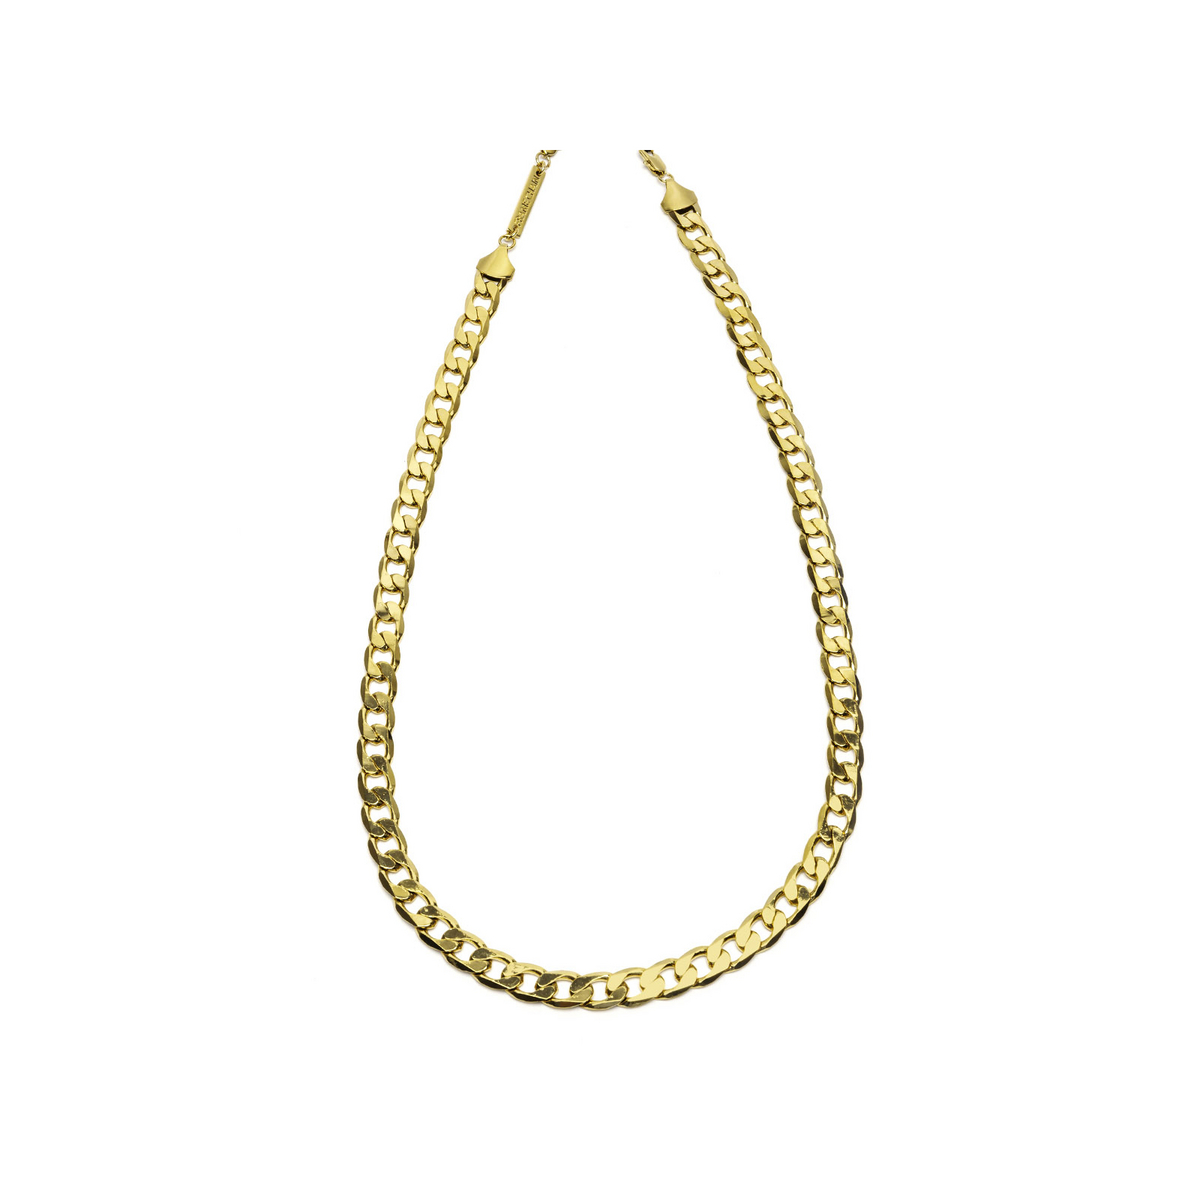 Frame Chain® Accessories: Eyefash color Yellow Gold - three-quarters view.